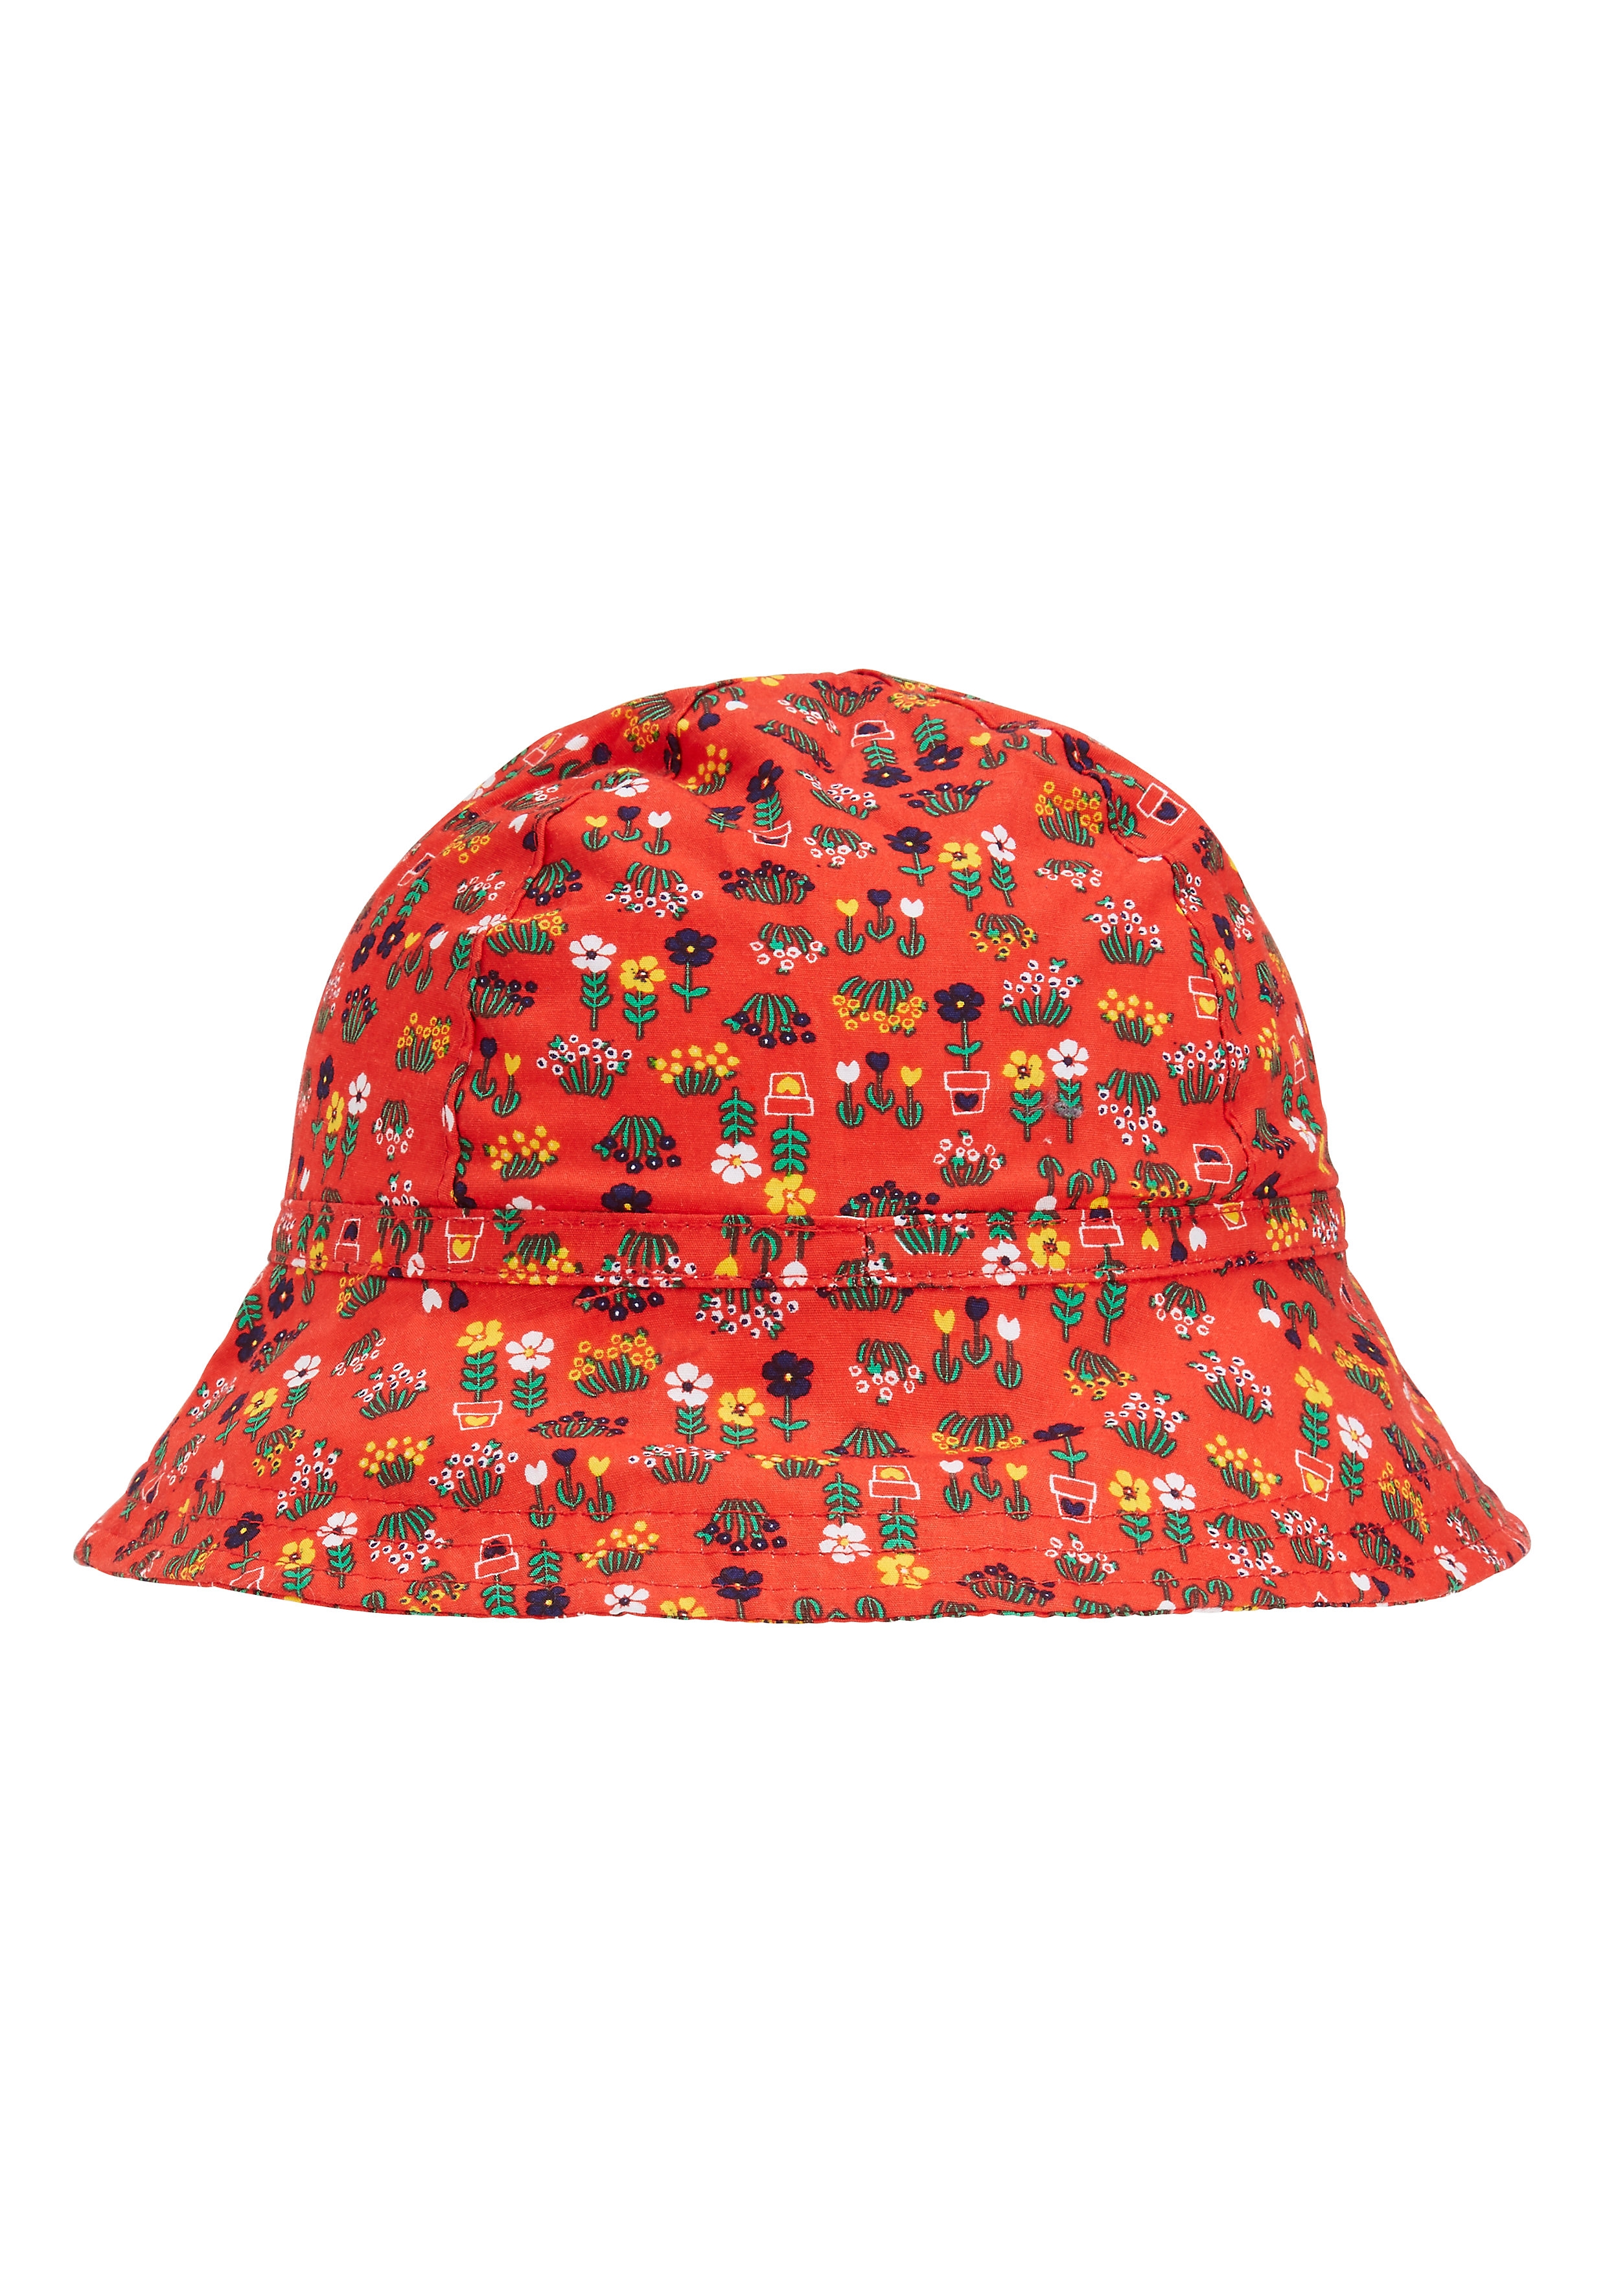 Mothercare | Girls Floral Sunhat - Red